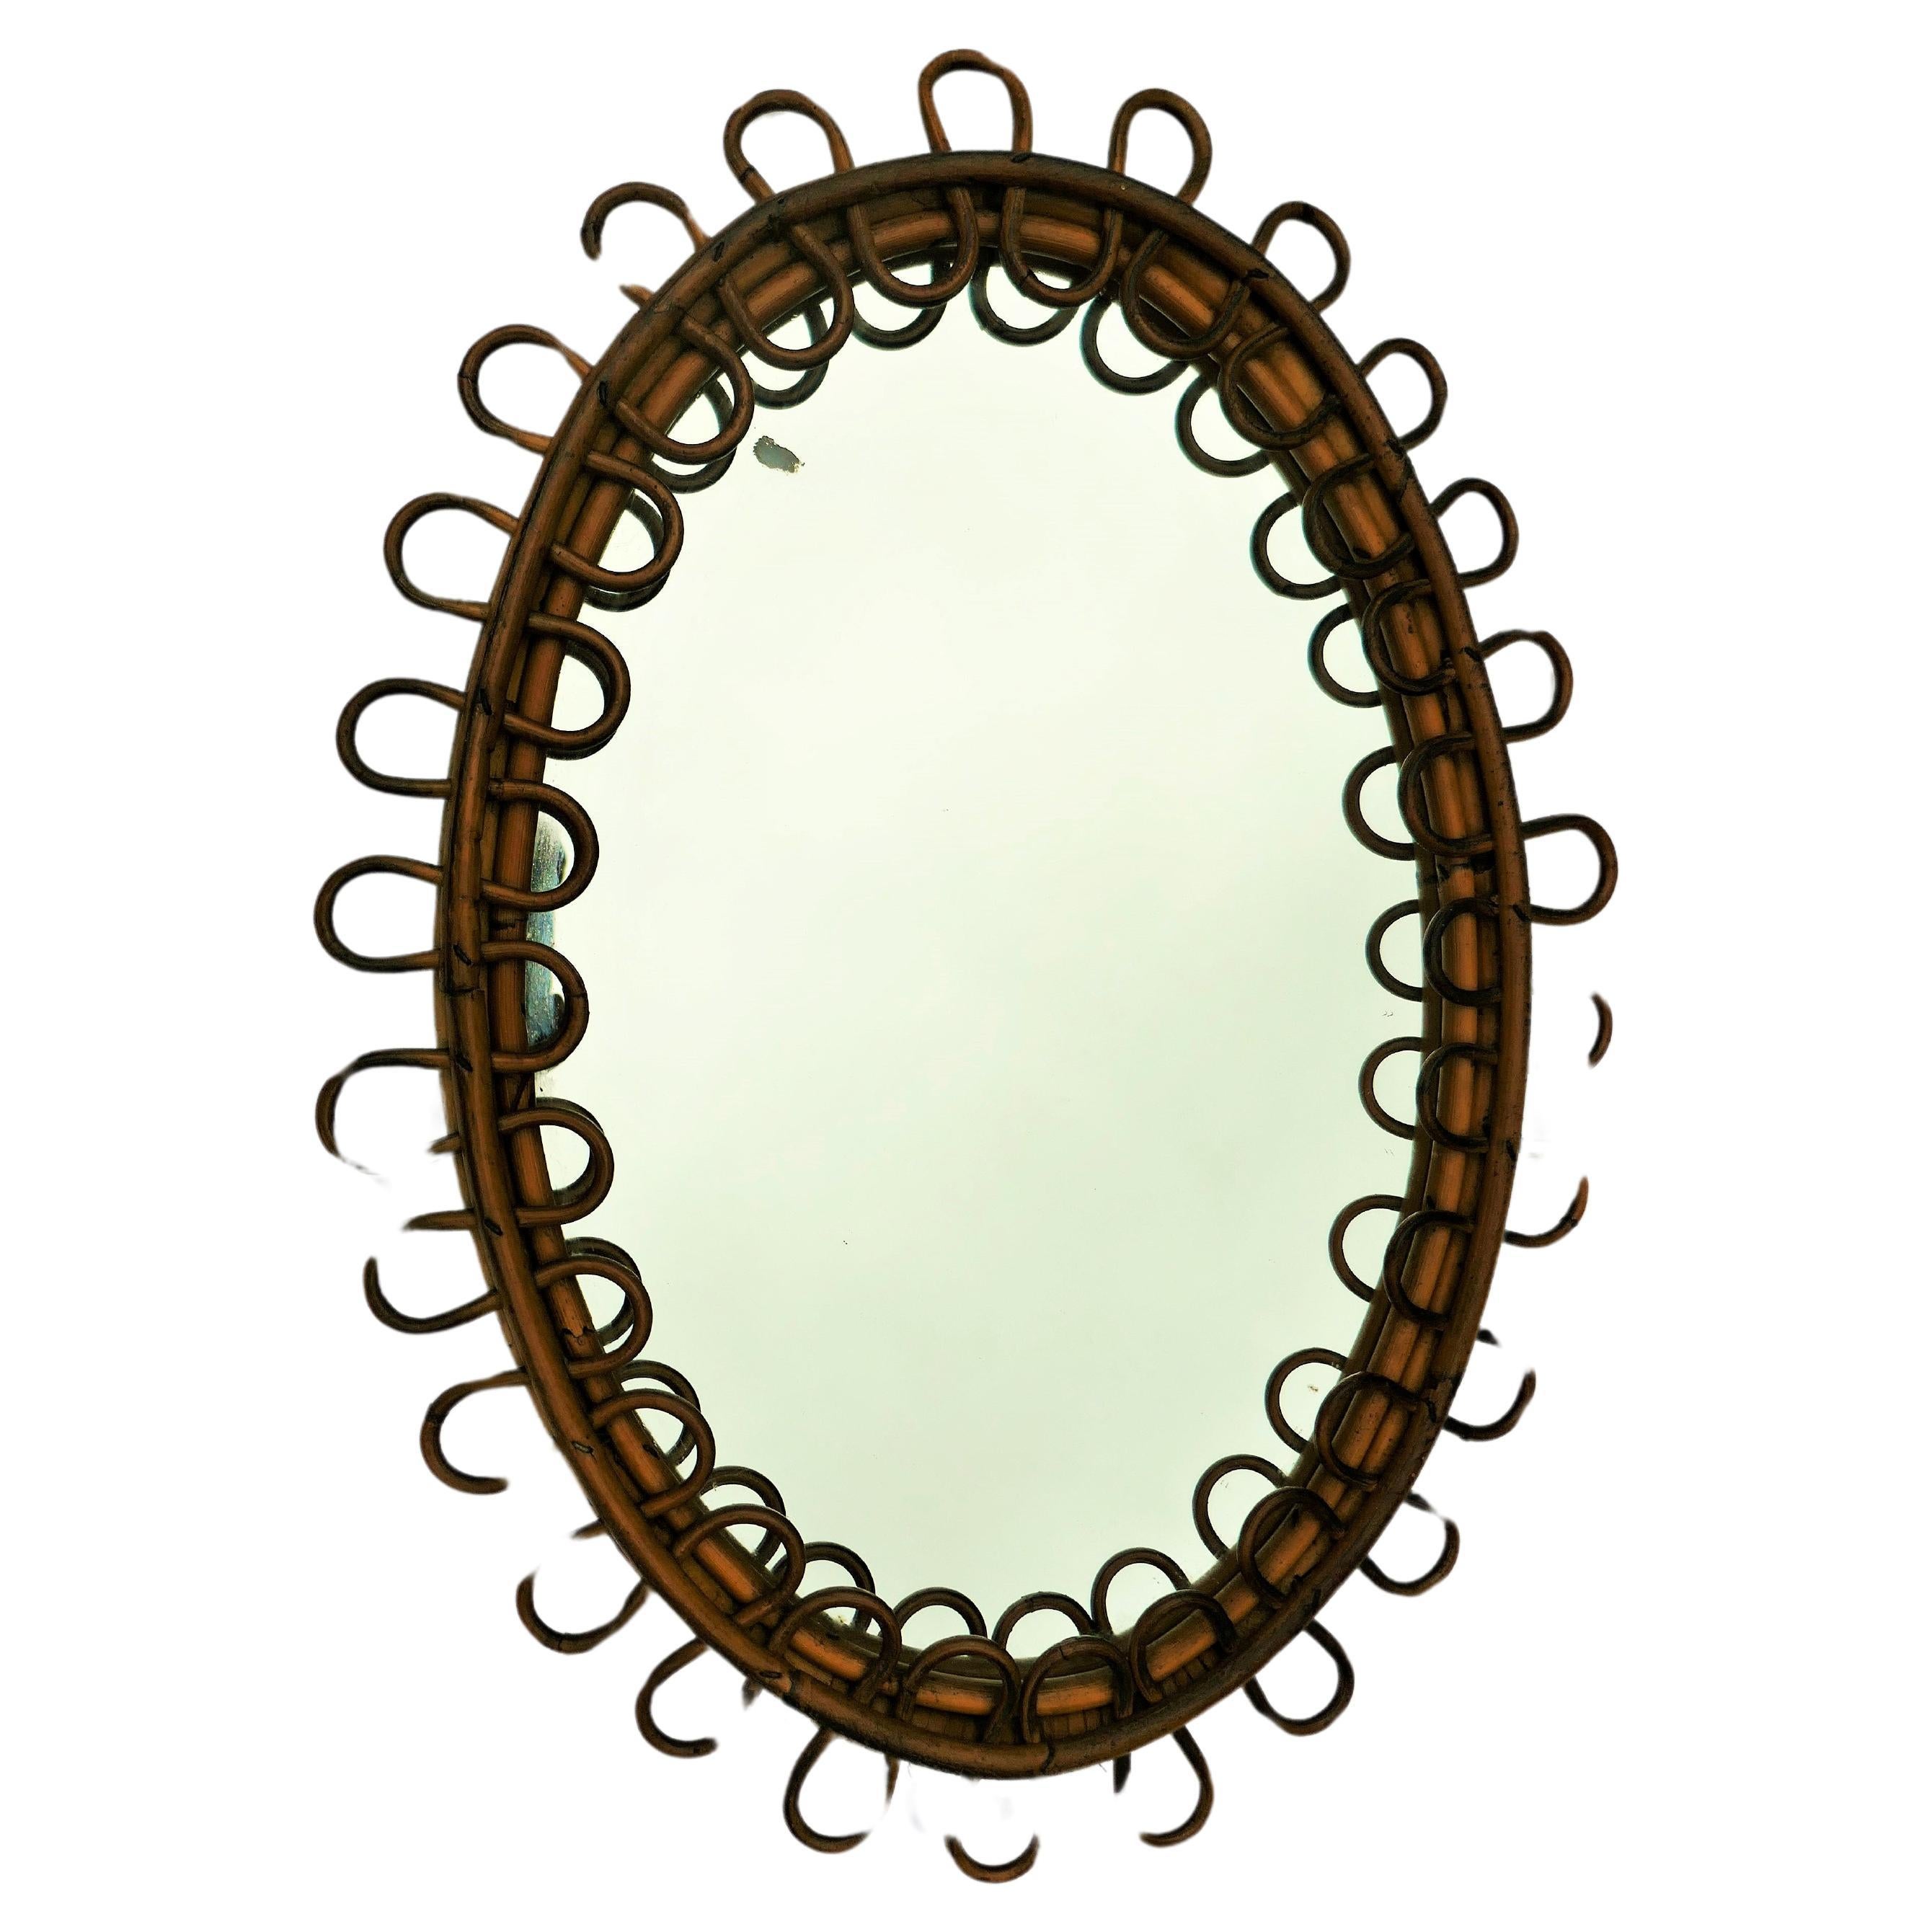 Bamboo French or Italian rattan wicker mirror For Sale